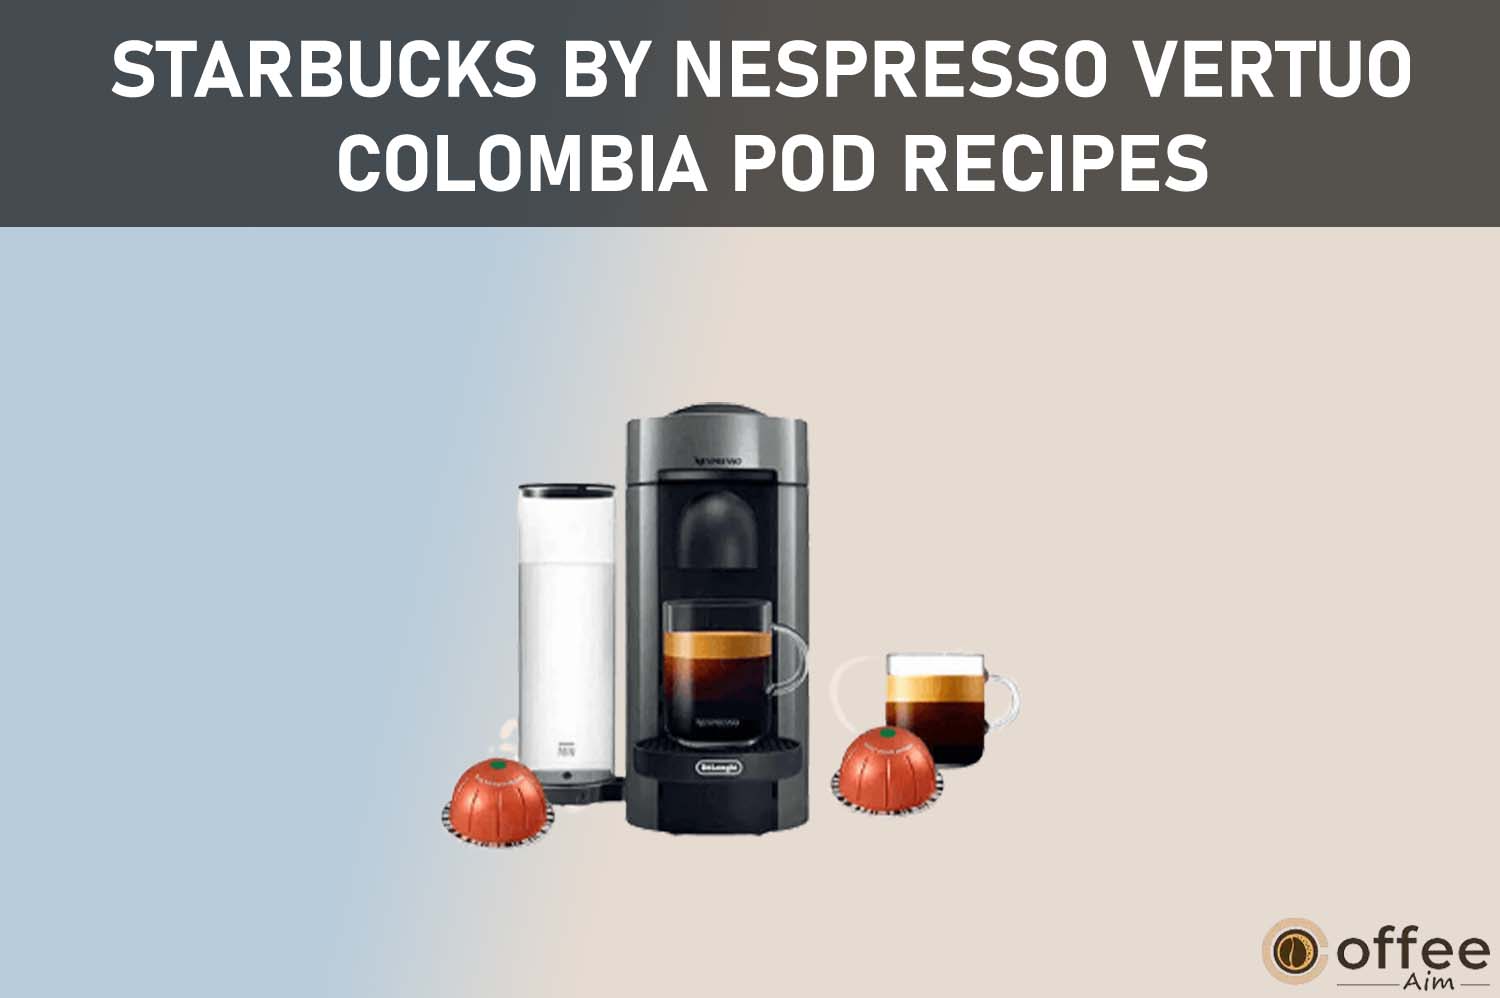 Featured image for the article "Starbucks by Nespresso Vertuo Colombia Pod Recipes"